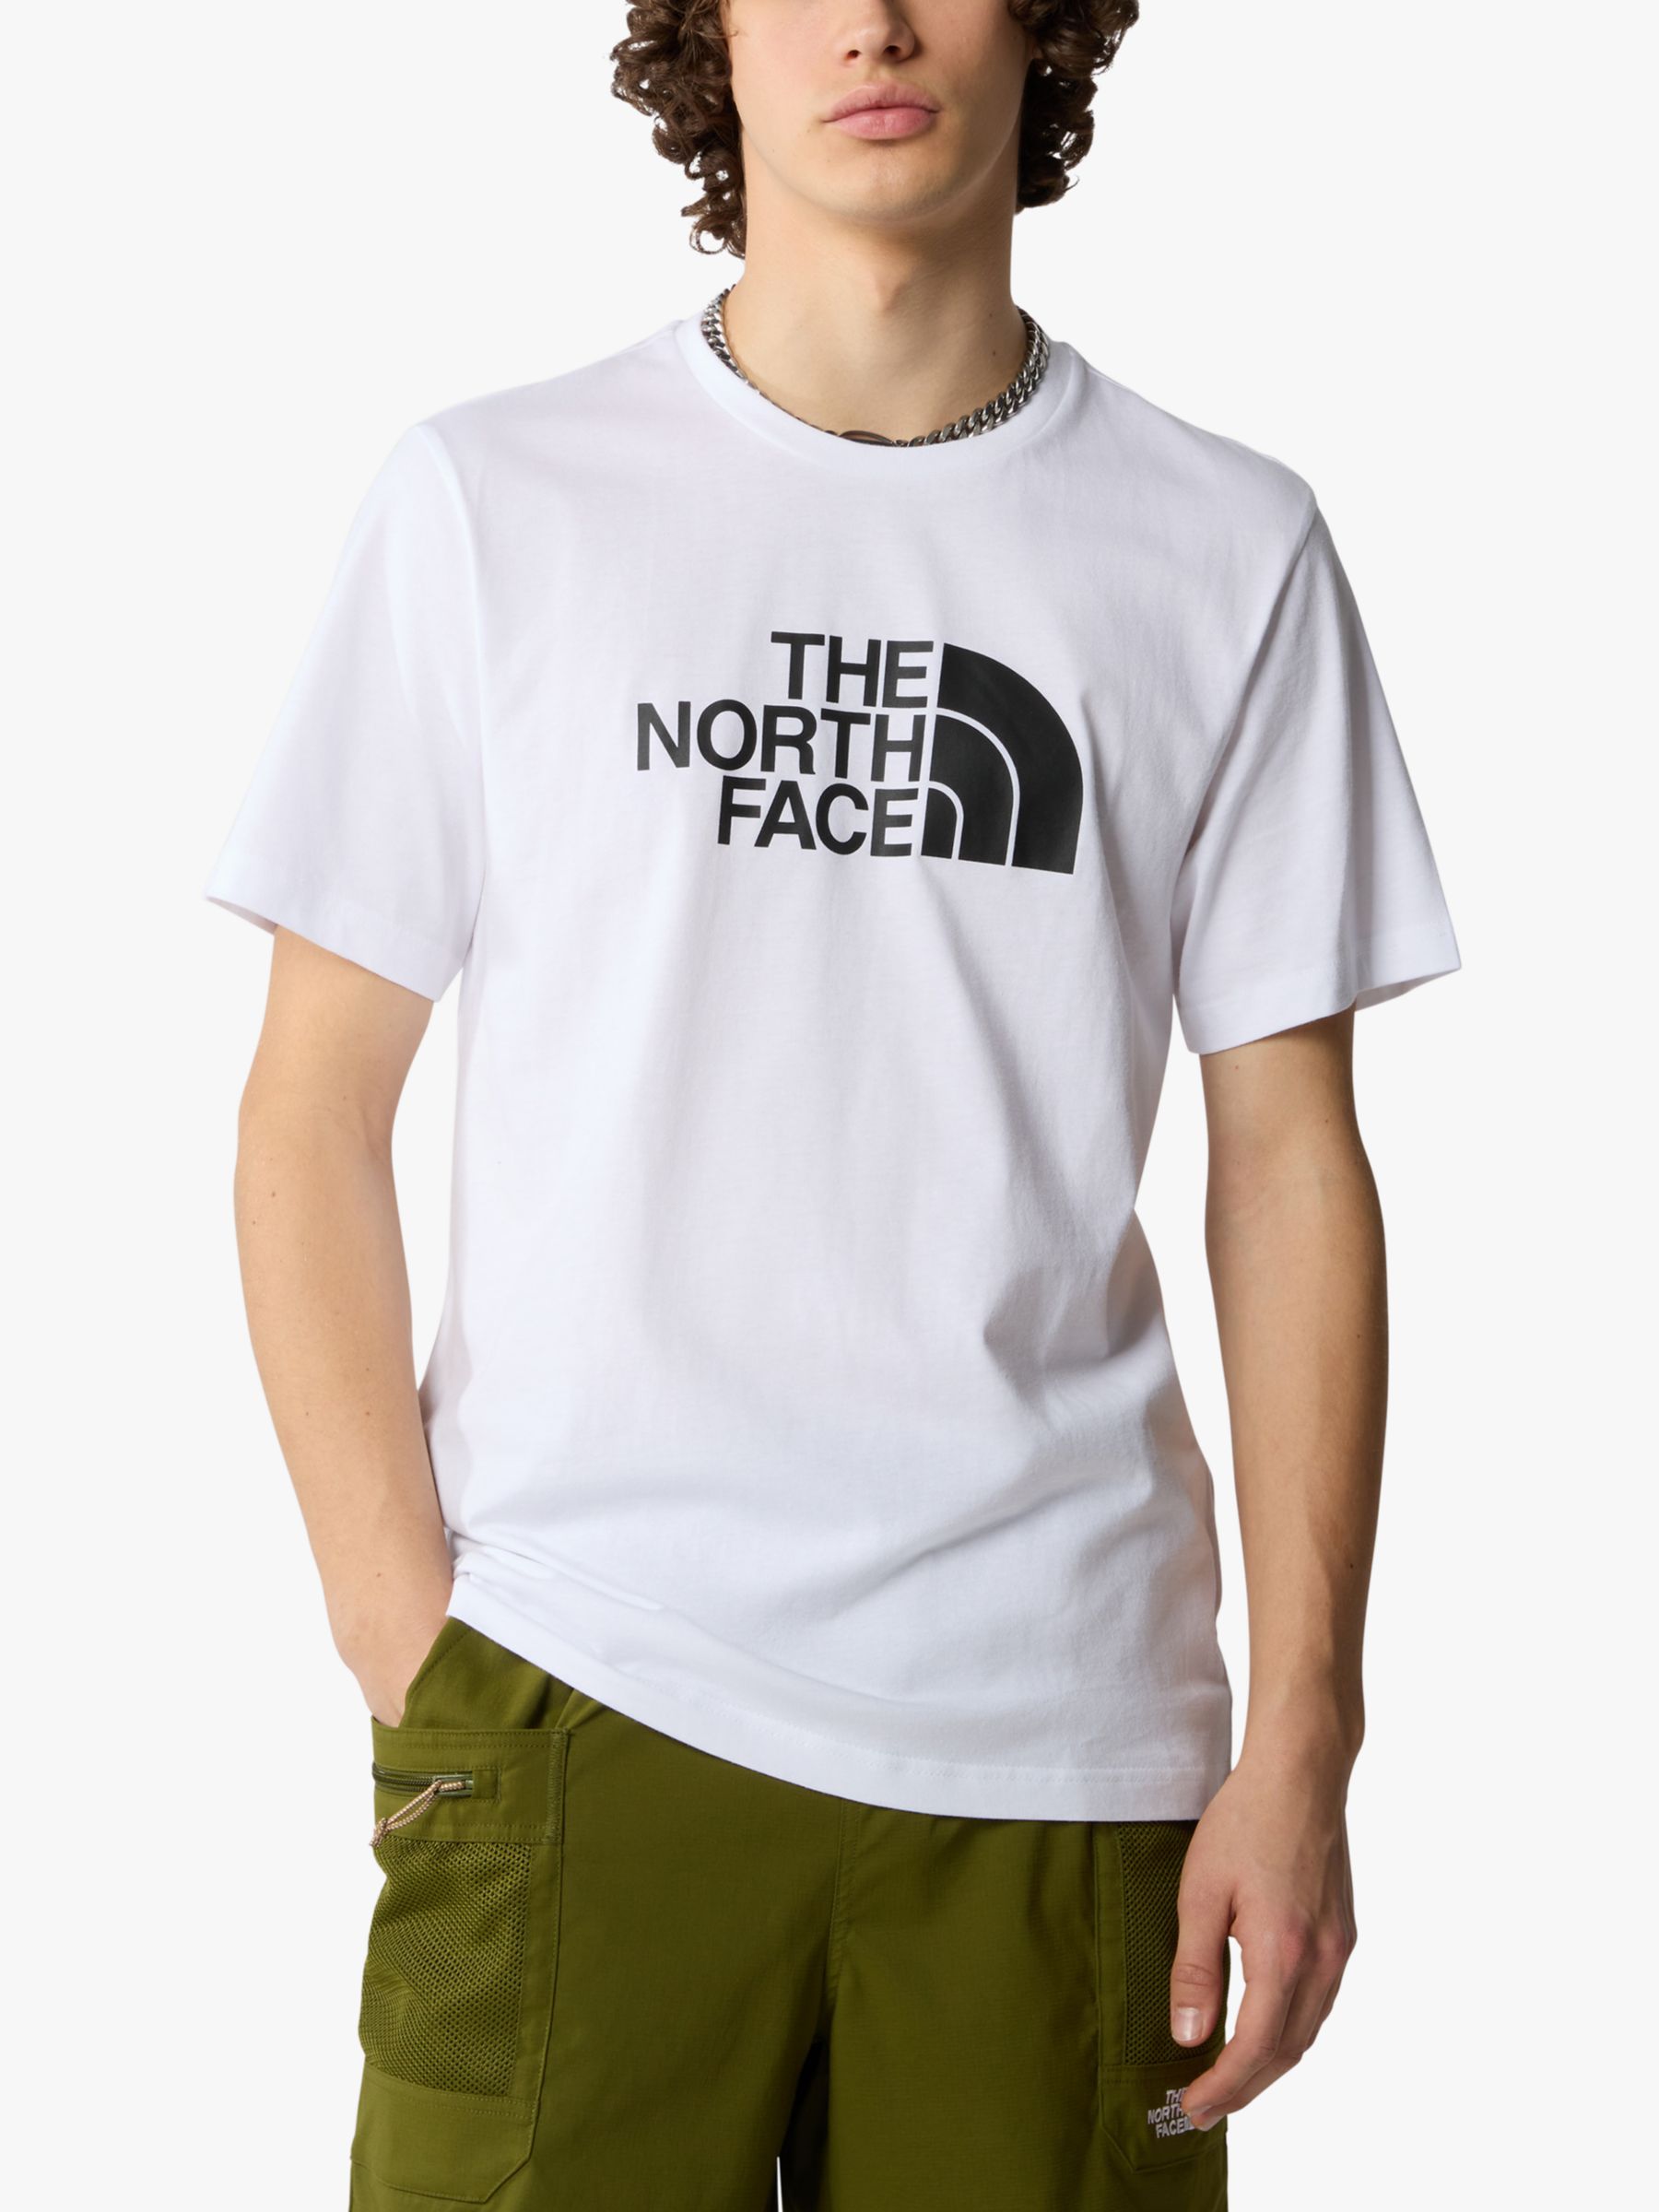 The North Face Easy Short Sleeve T-Shirt, White, M